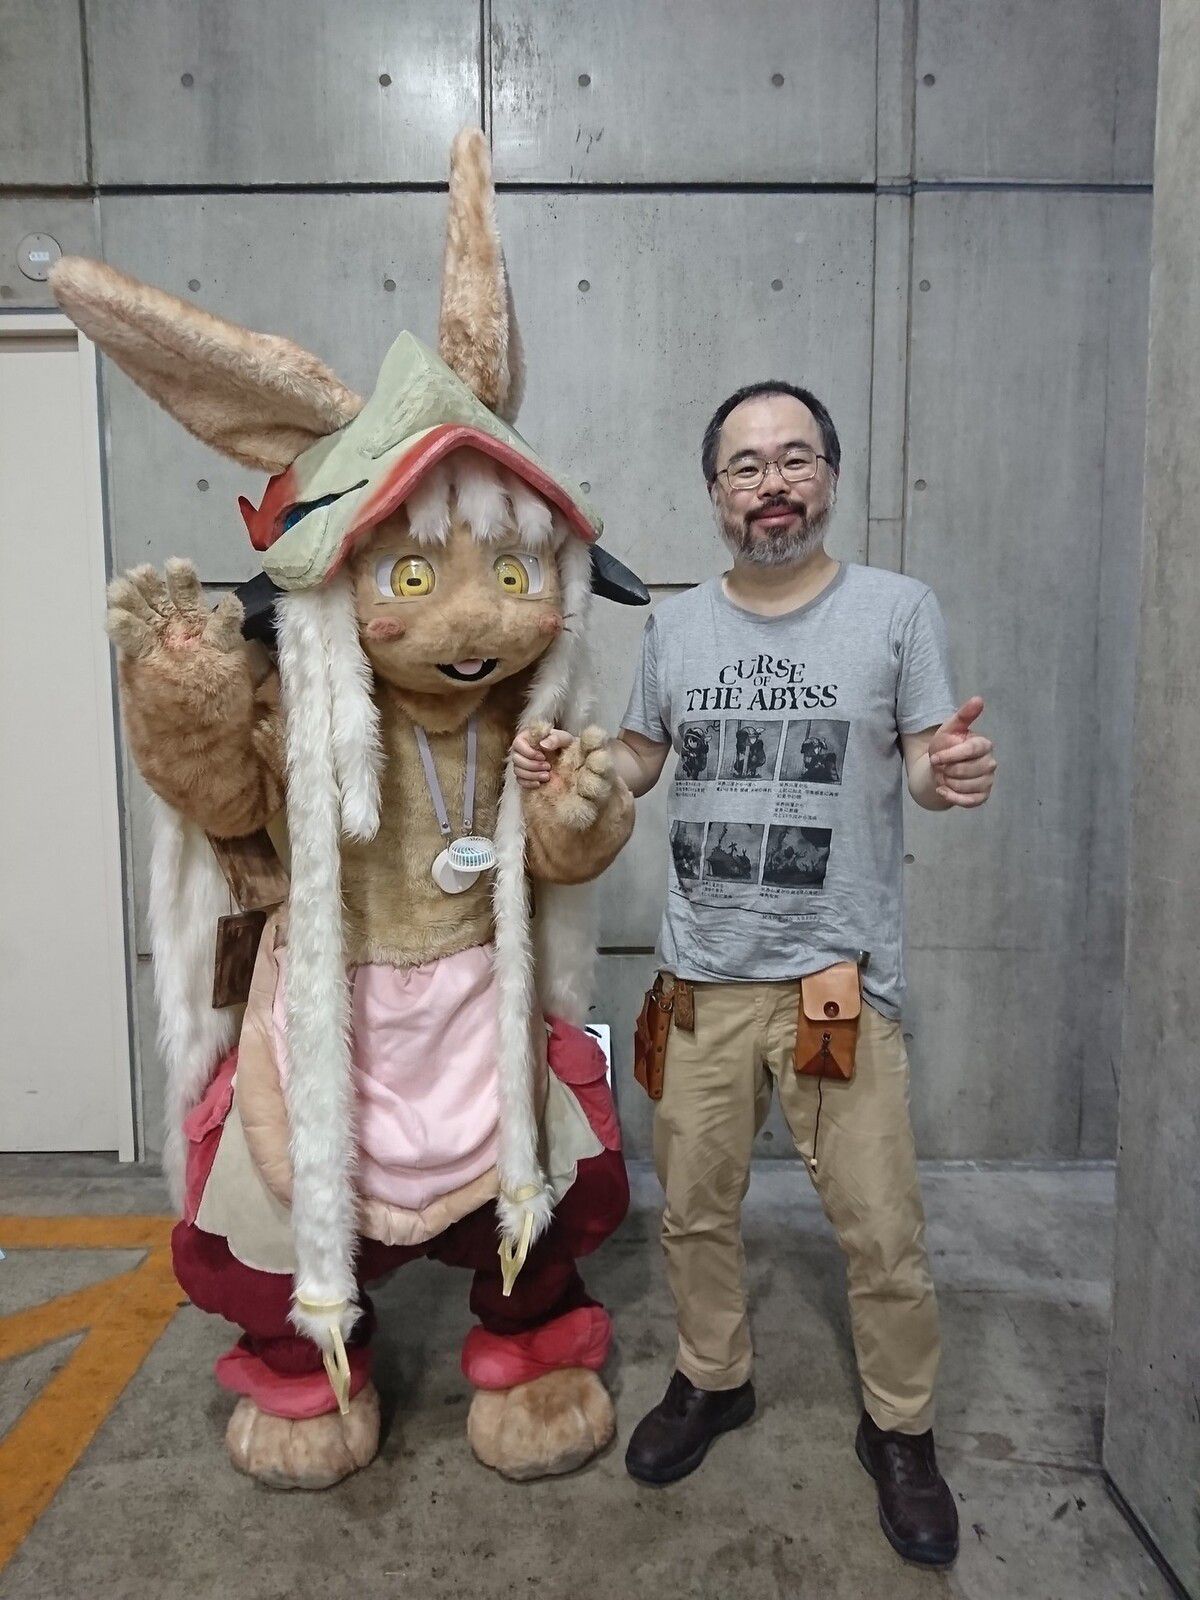 [With image] author of made-in abyss, too cute wwwww 1